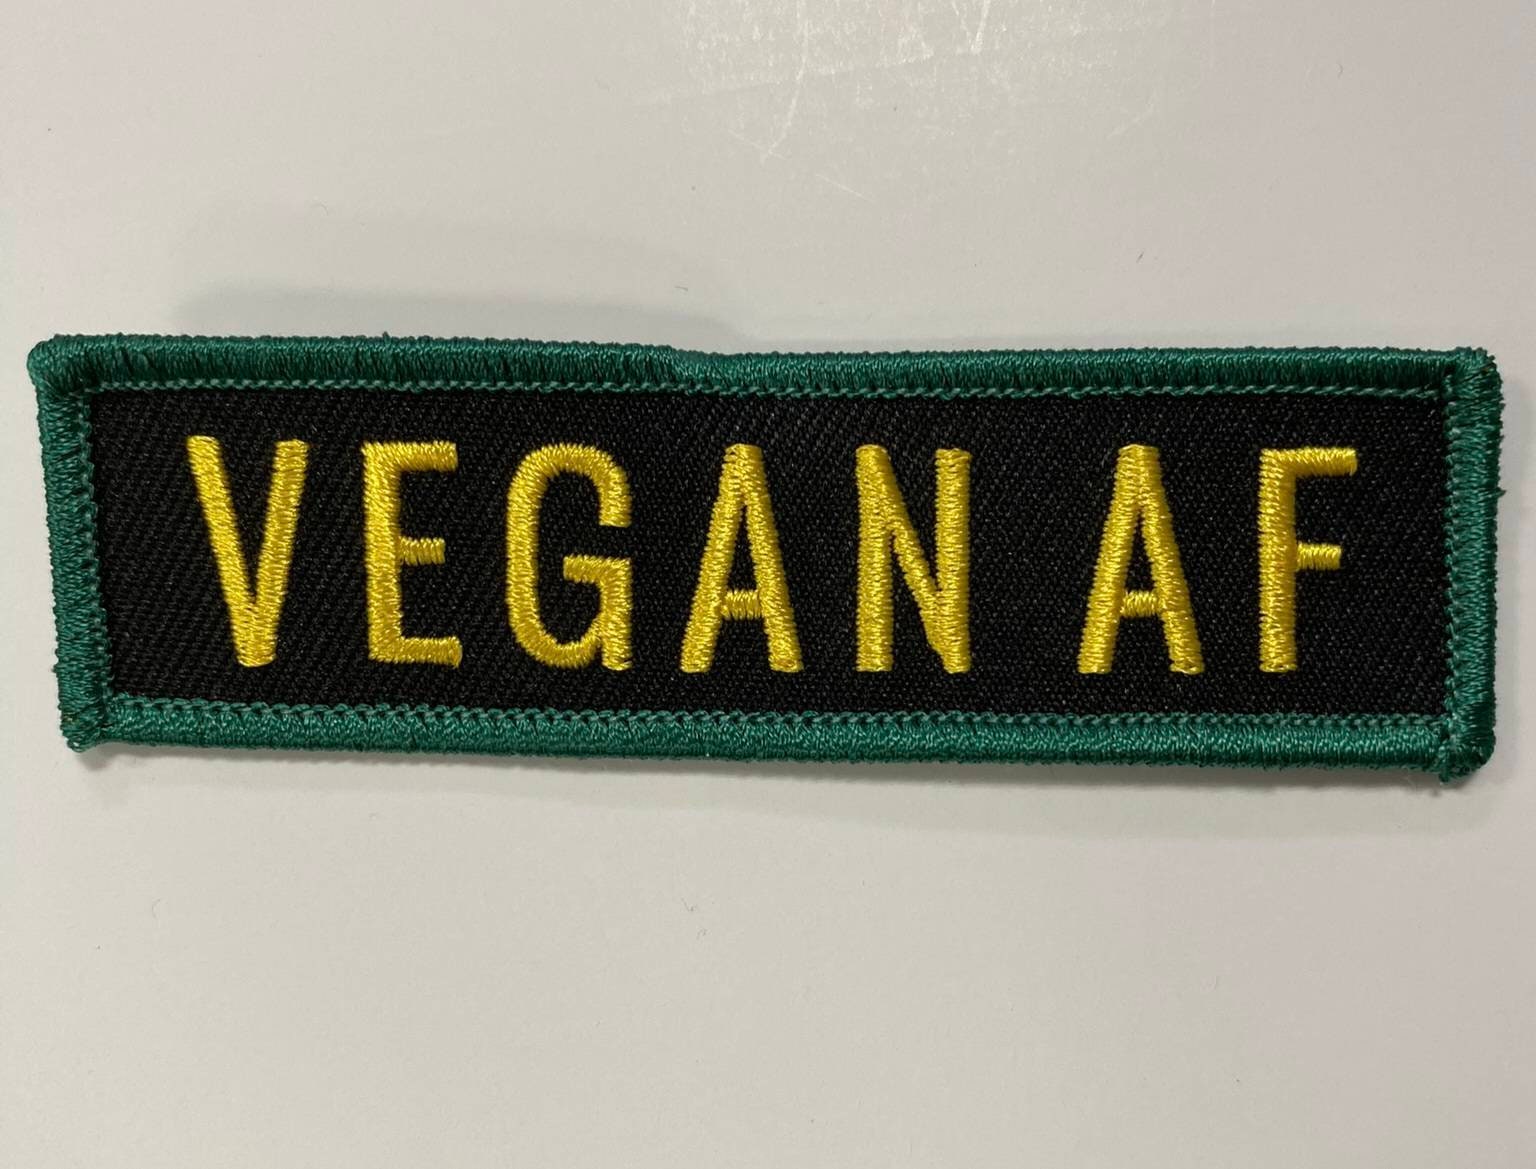 Vegan Collection: New, 1-pc, "Vegan AF", Sz 4x1", Iron-on Embroidered Patch, Gift for Vegans, Cute Patch Jackets, Hat